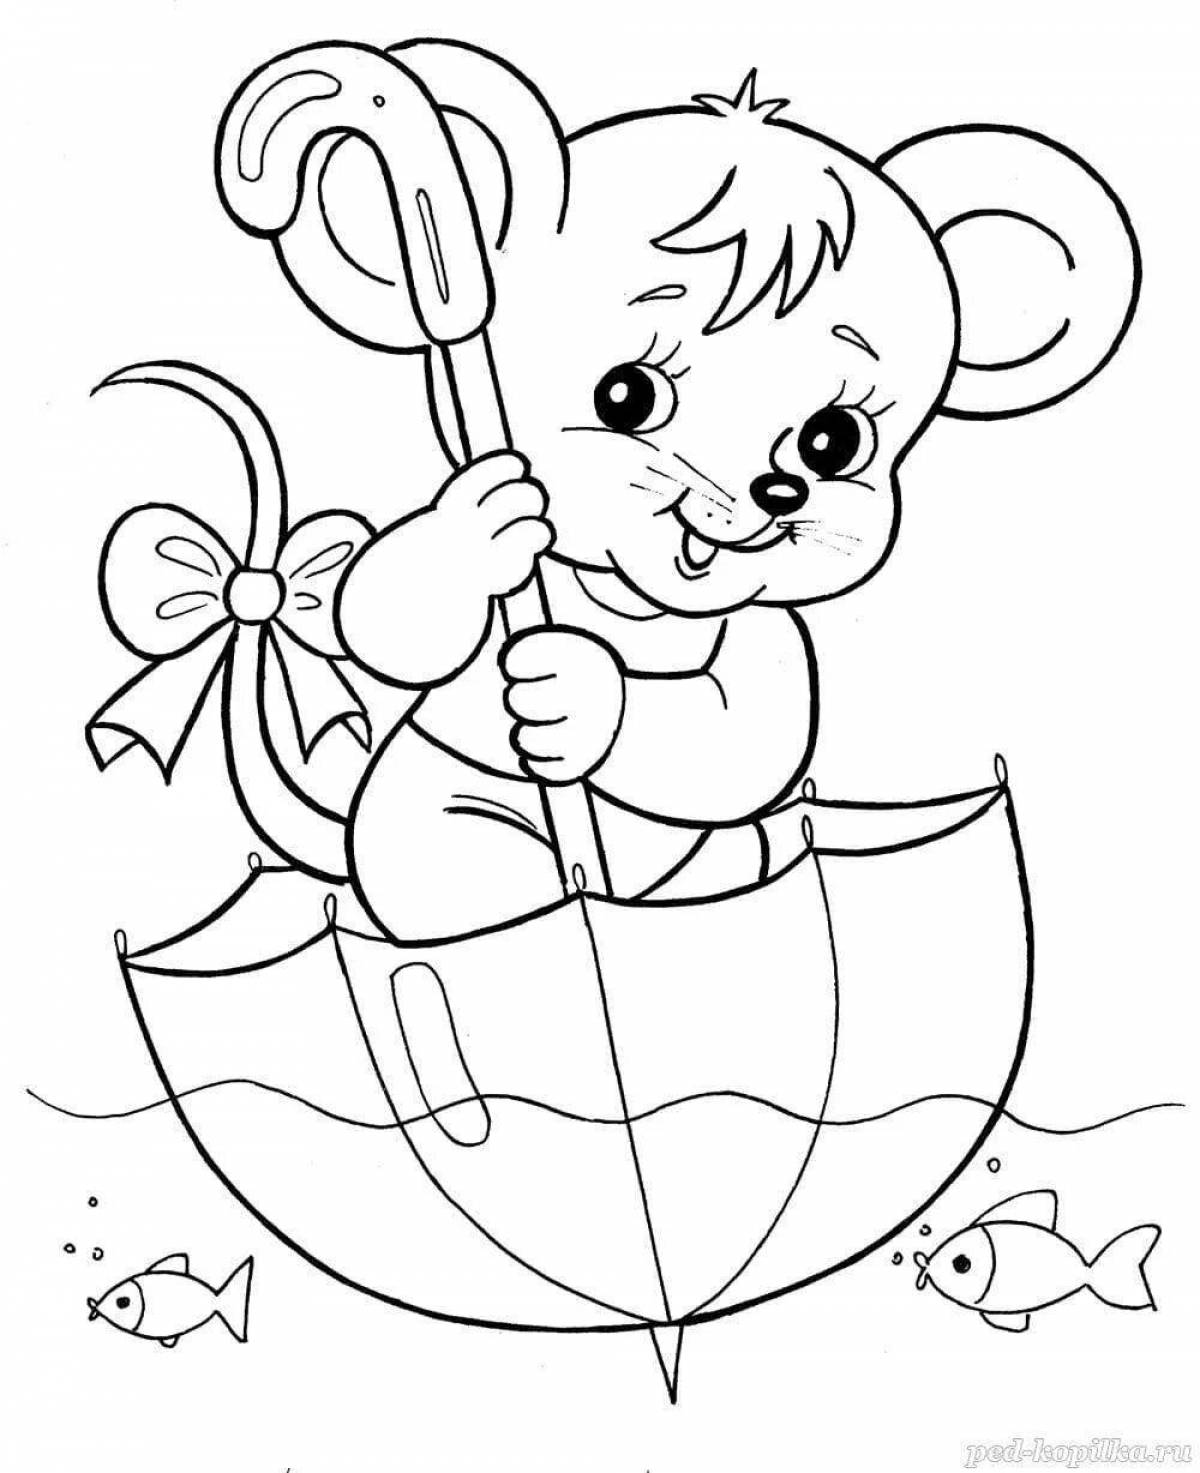 Sparkling coloring page 4 for girls